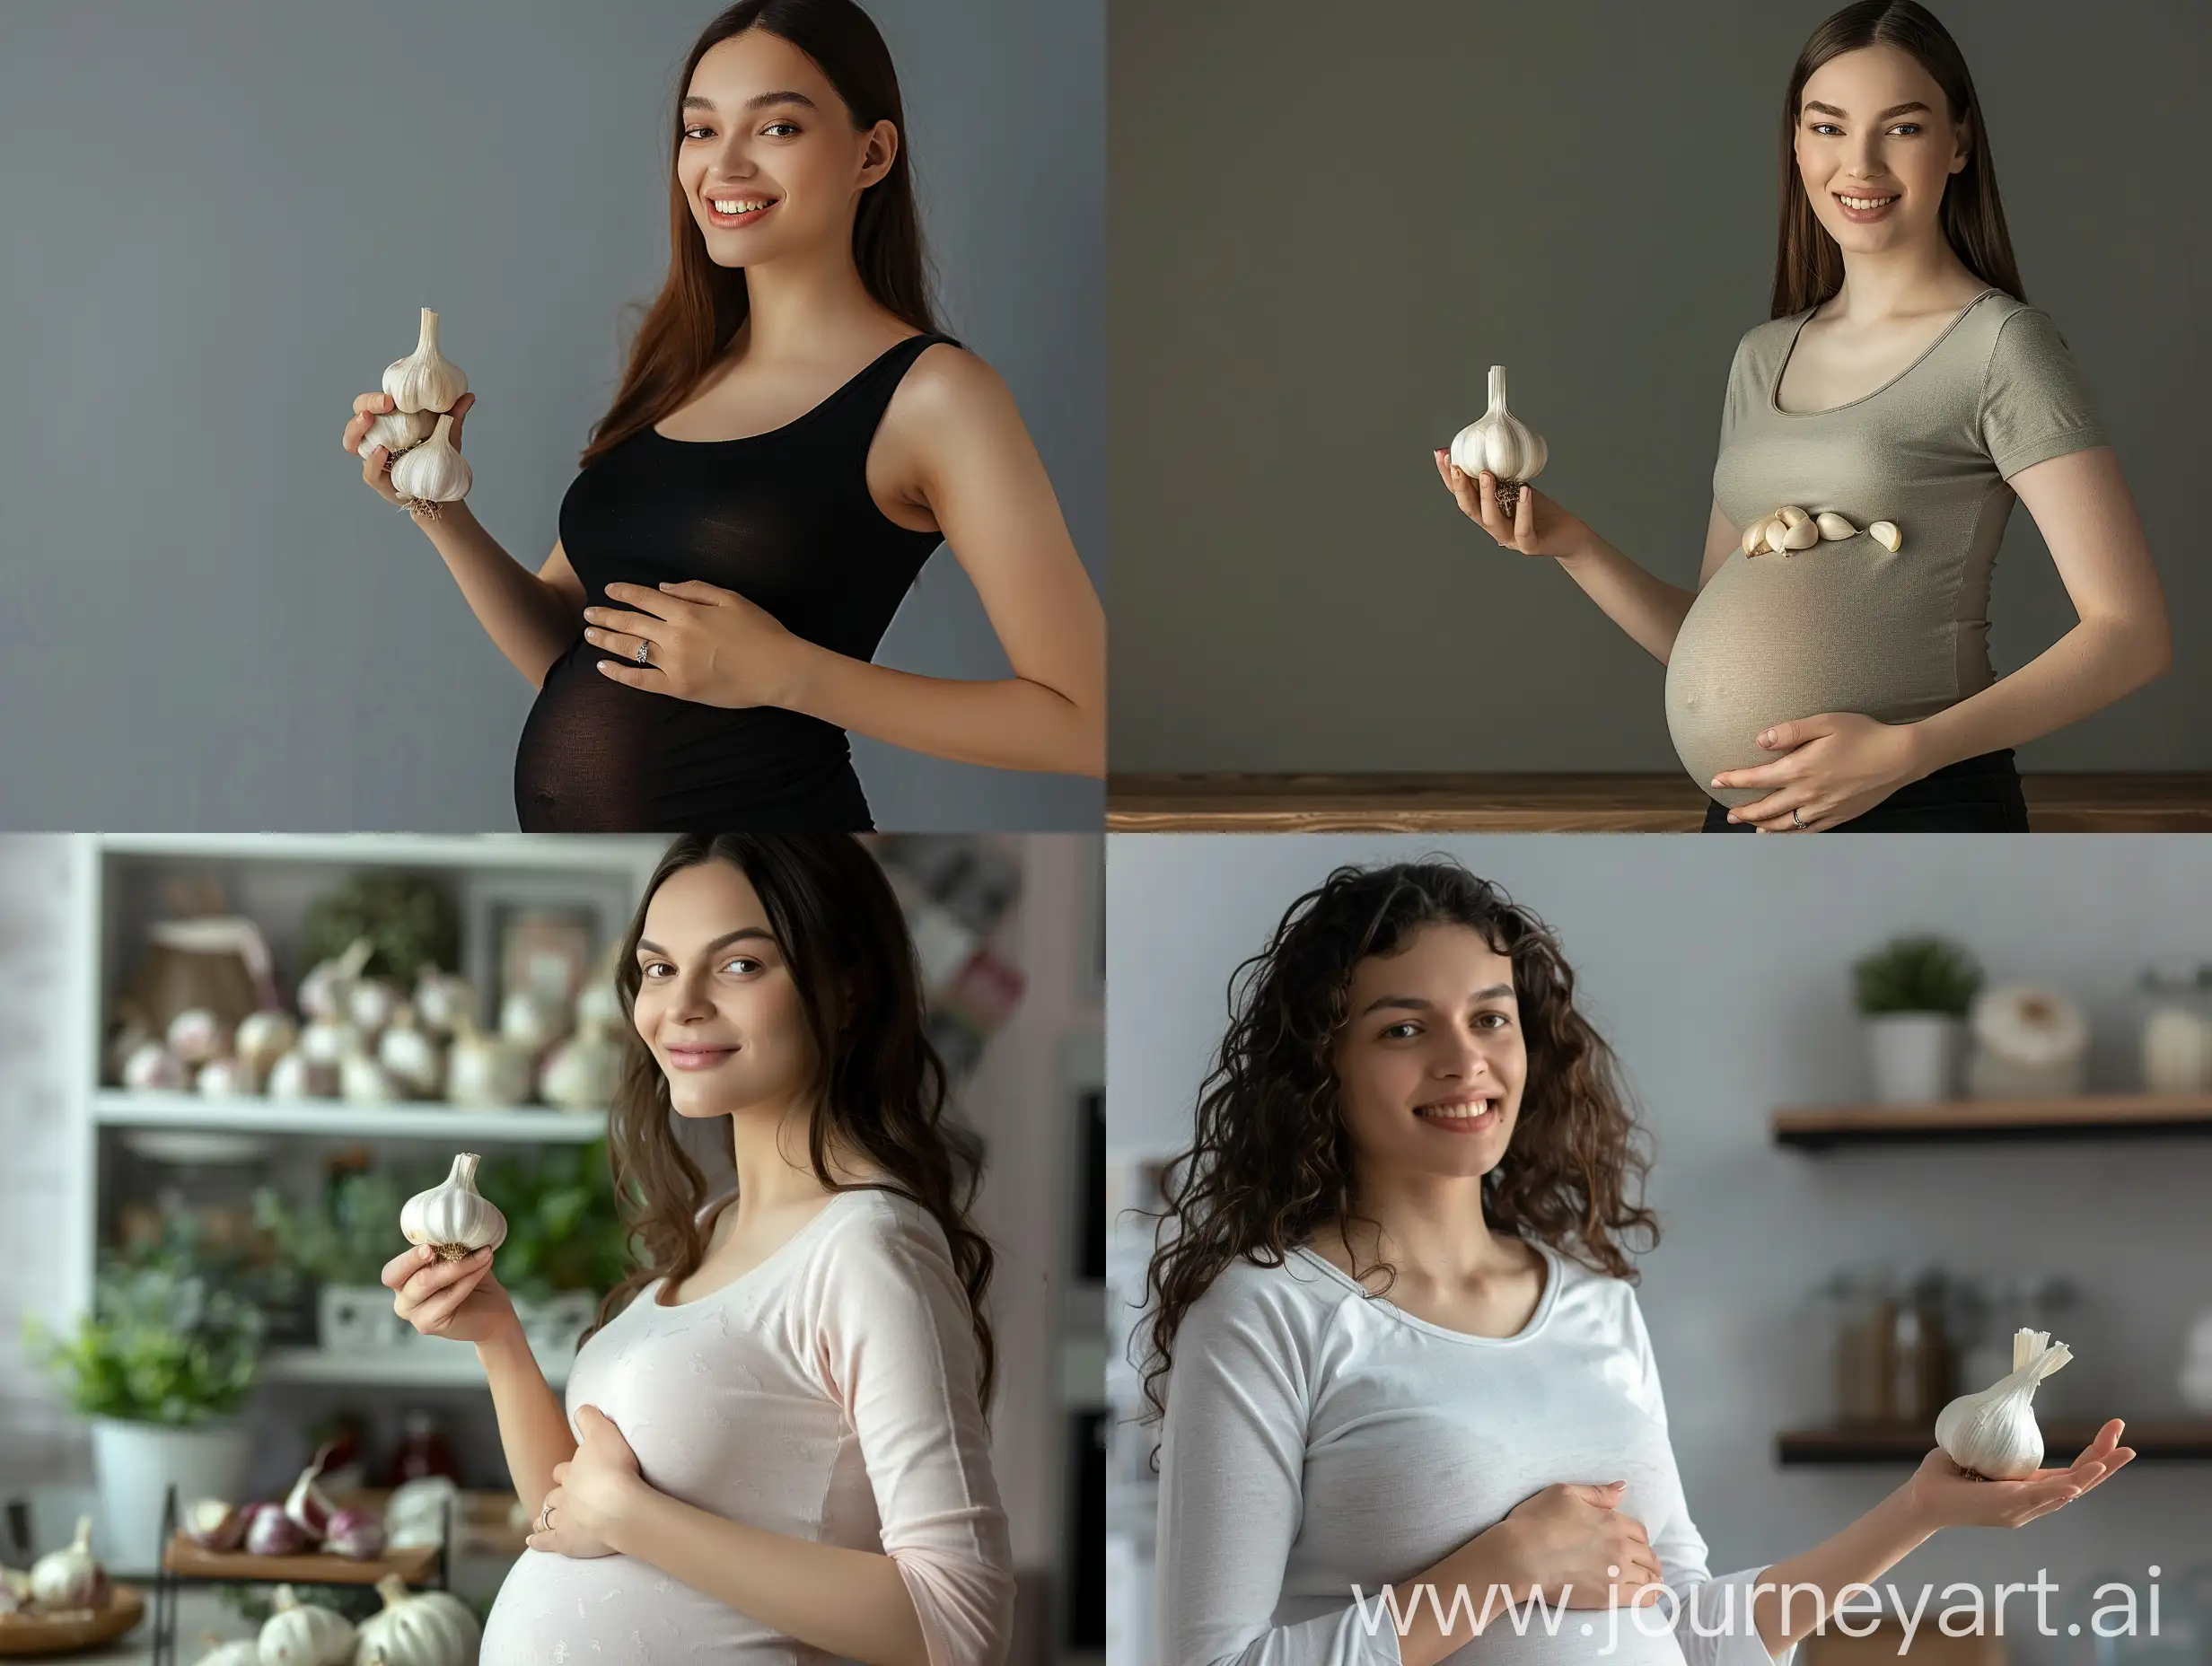 An attractive advertising photo of a pregnant woman holding garlic in her hand